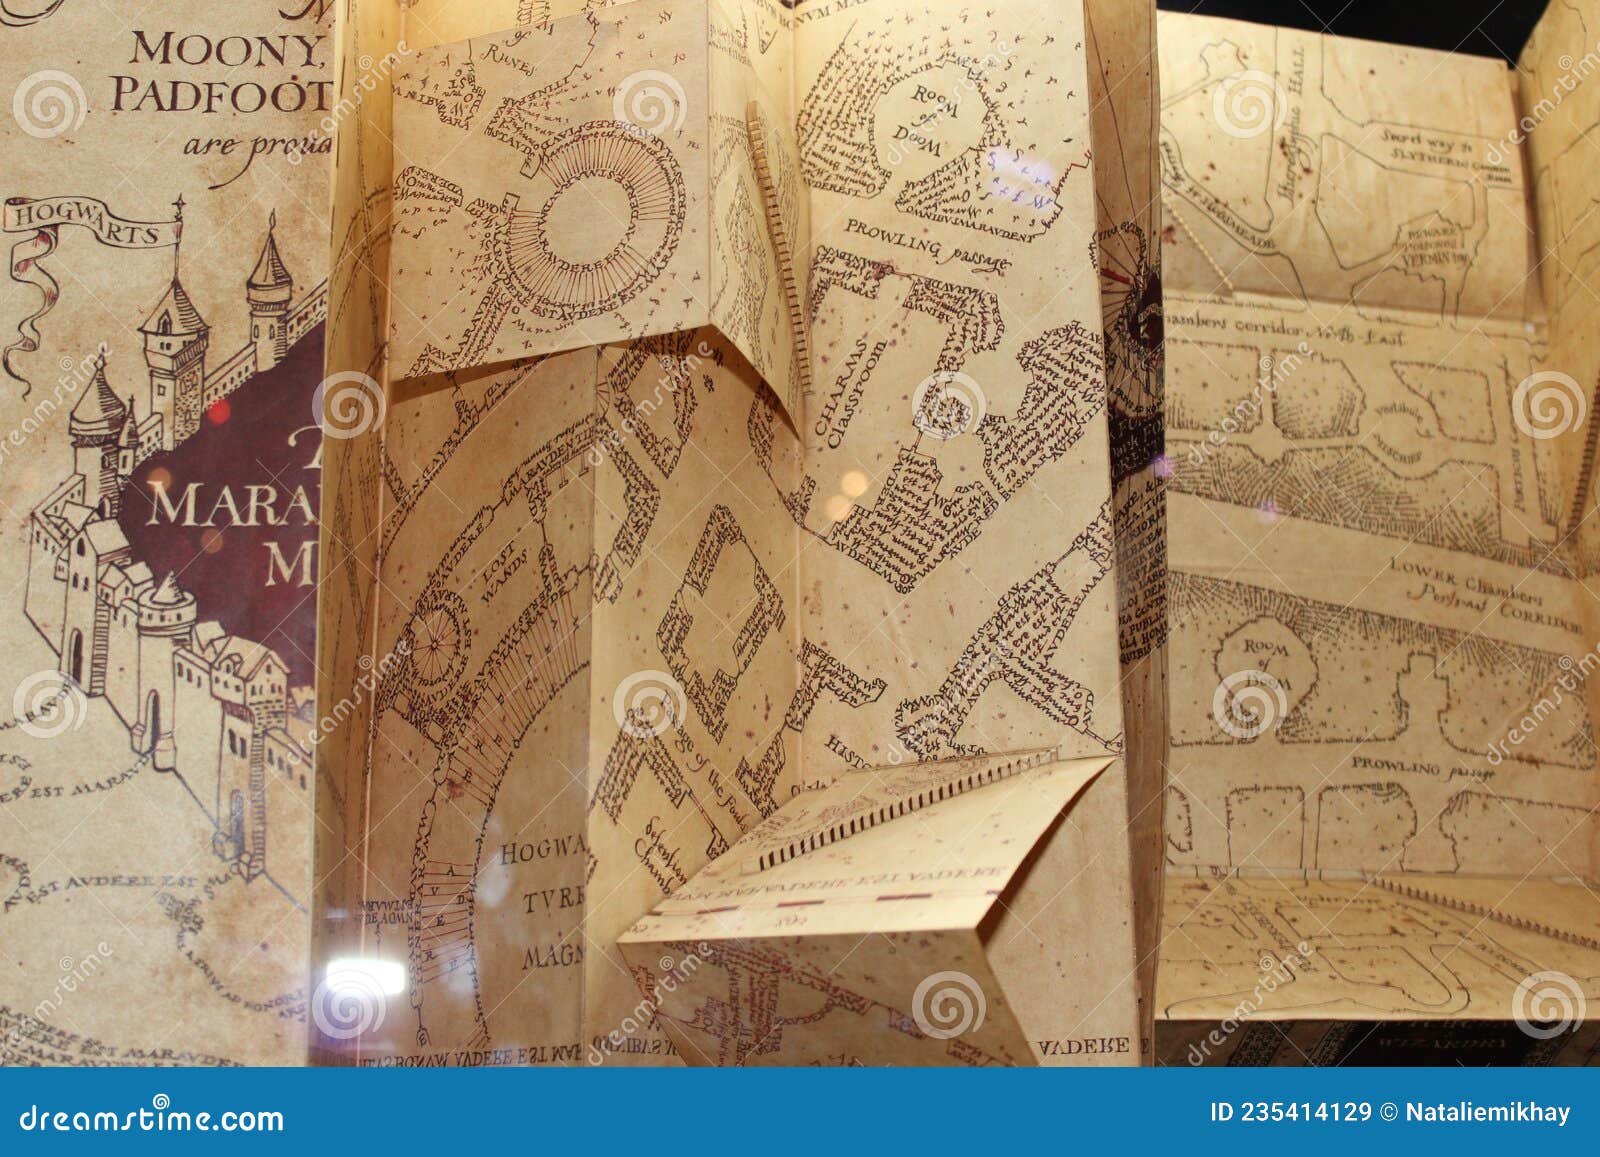 Harry Potter marauders map editorial stock image. Image of display -  235414129